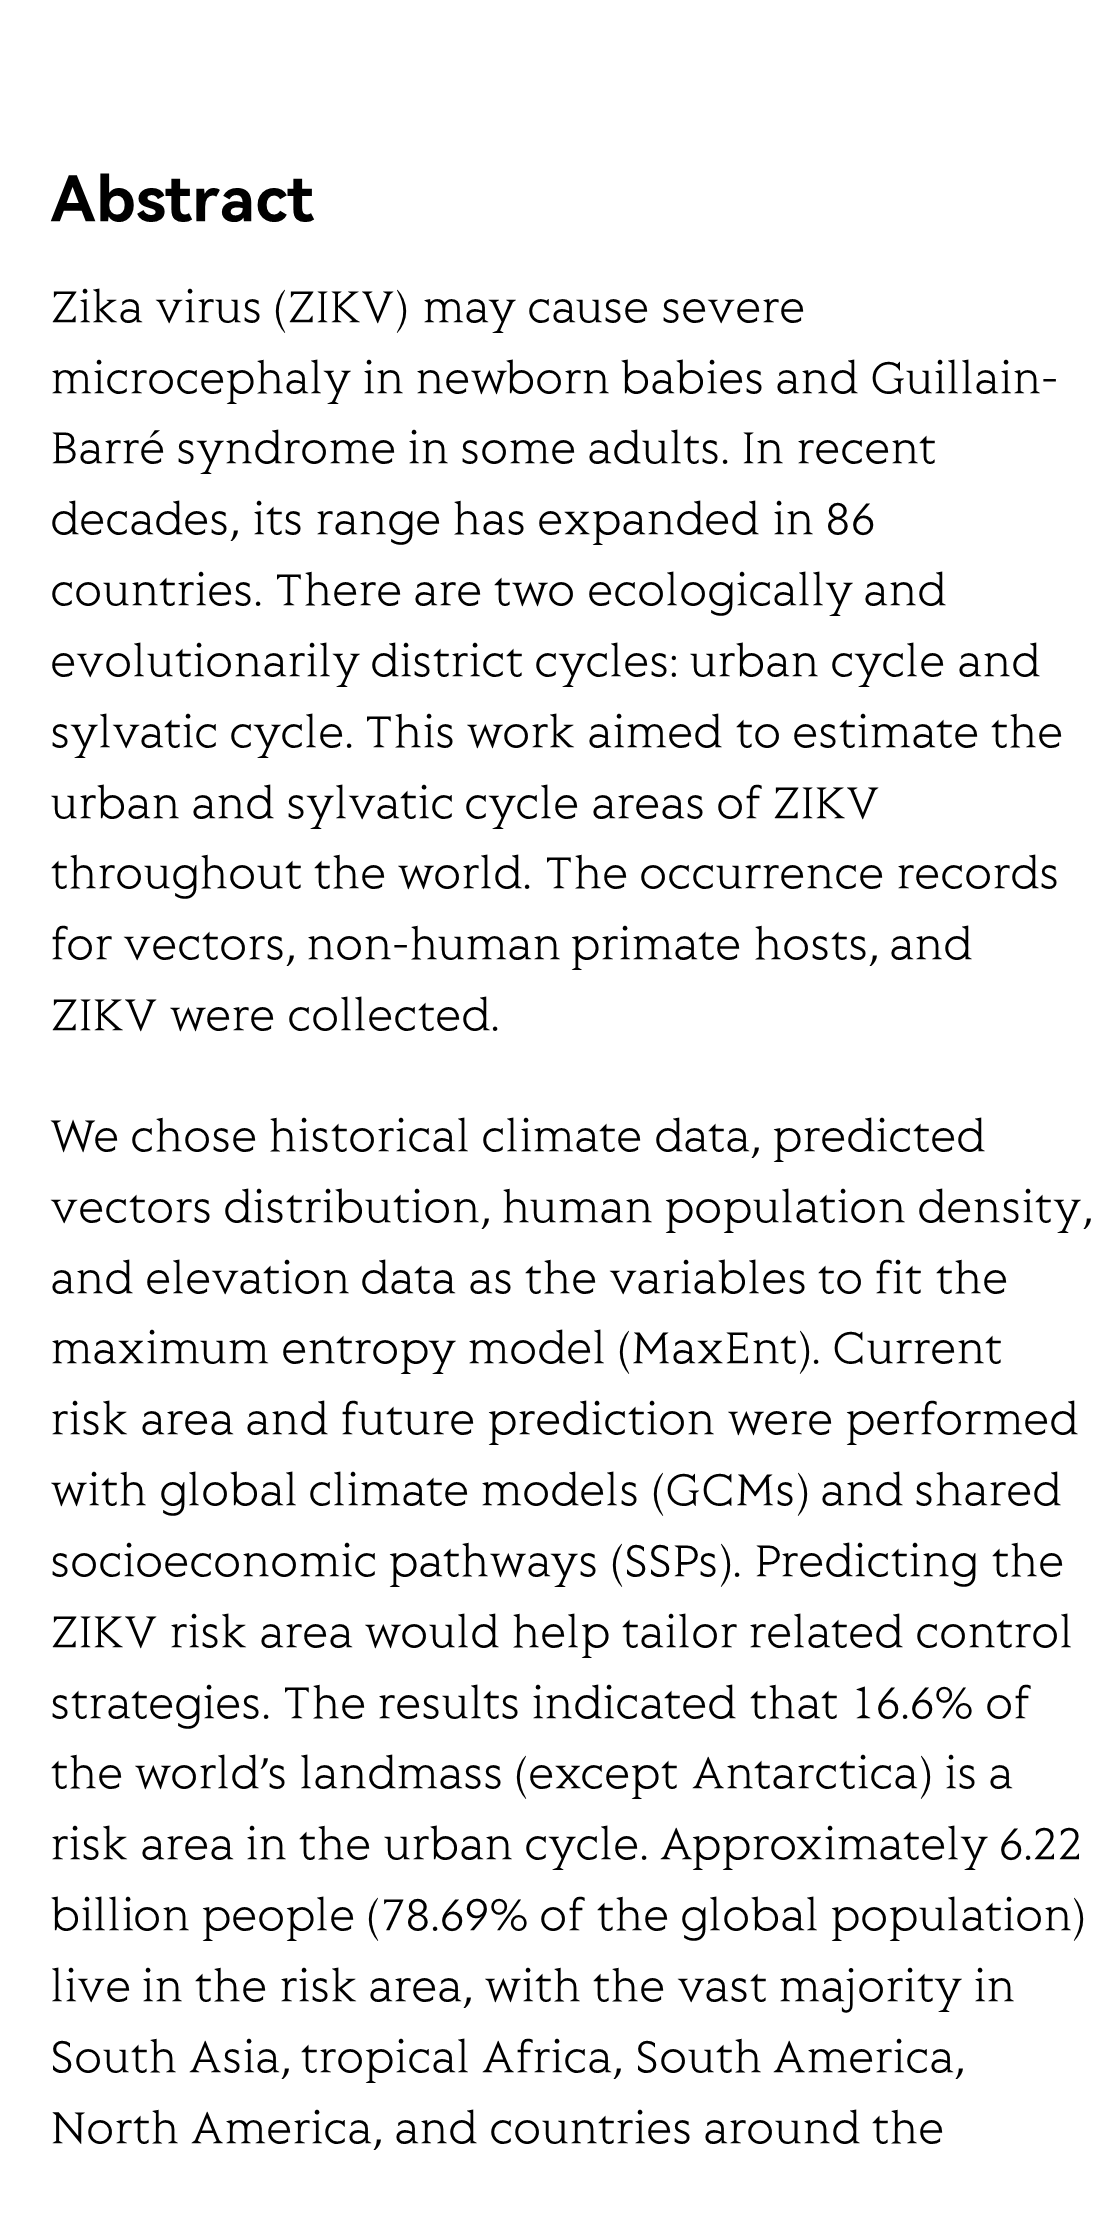 Assessing the risk of spread of zika virus under current and future climate scenarios_2